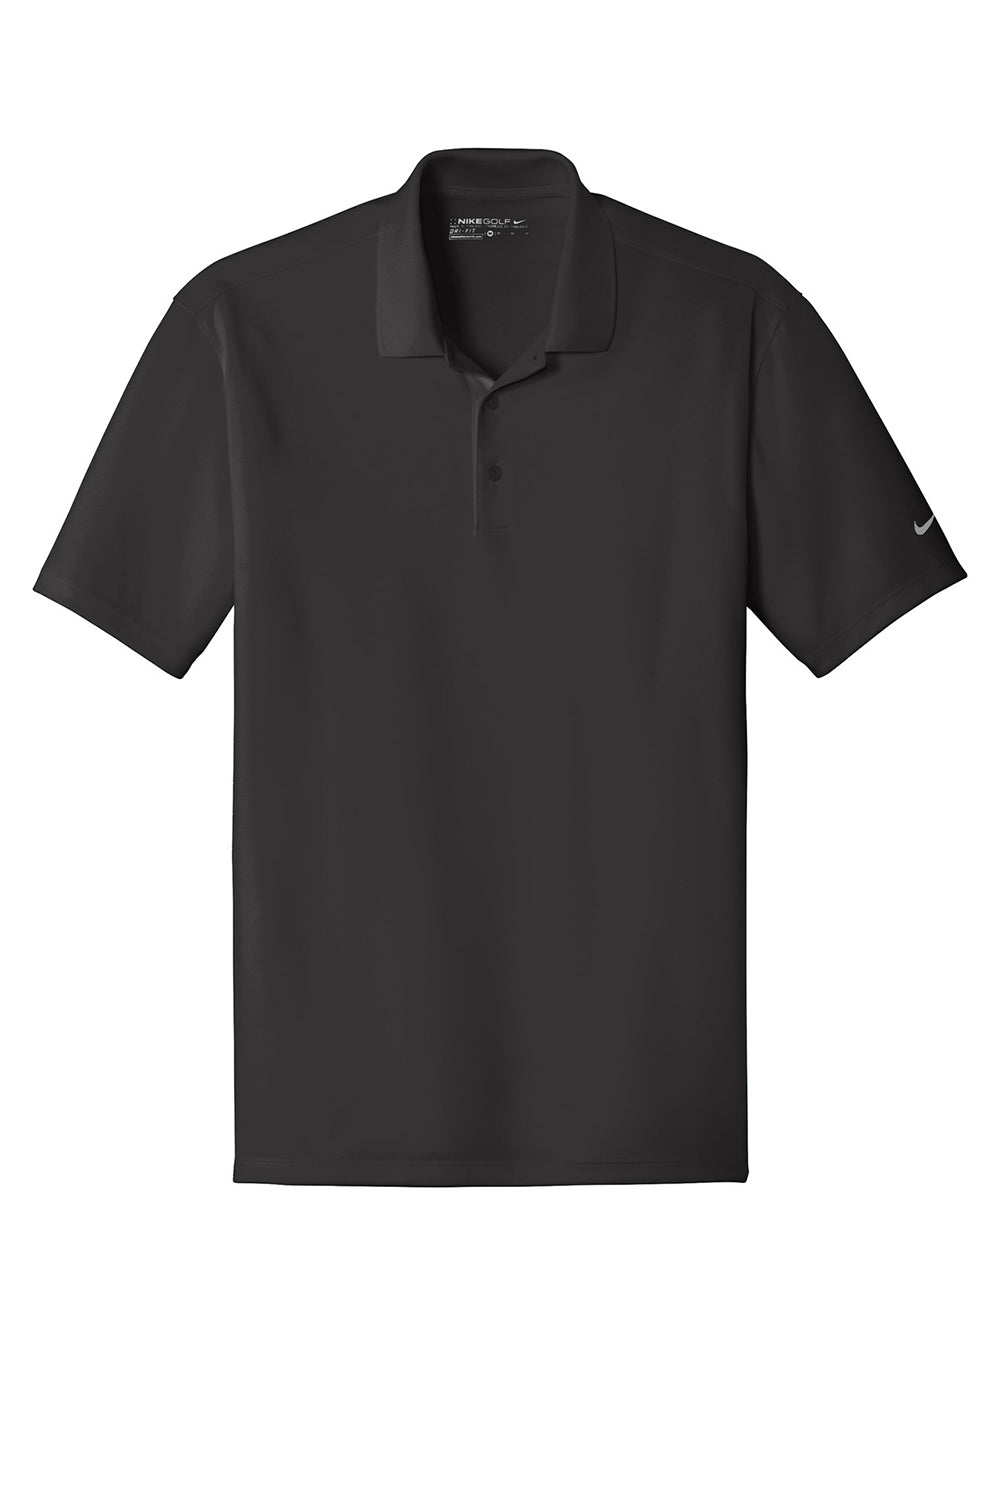 Nike 838956 Mens Players Dri-Fit Moisture Wicking Short Sleeve Polo Shirt Anthracite Grey Flat Front